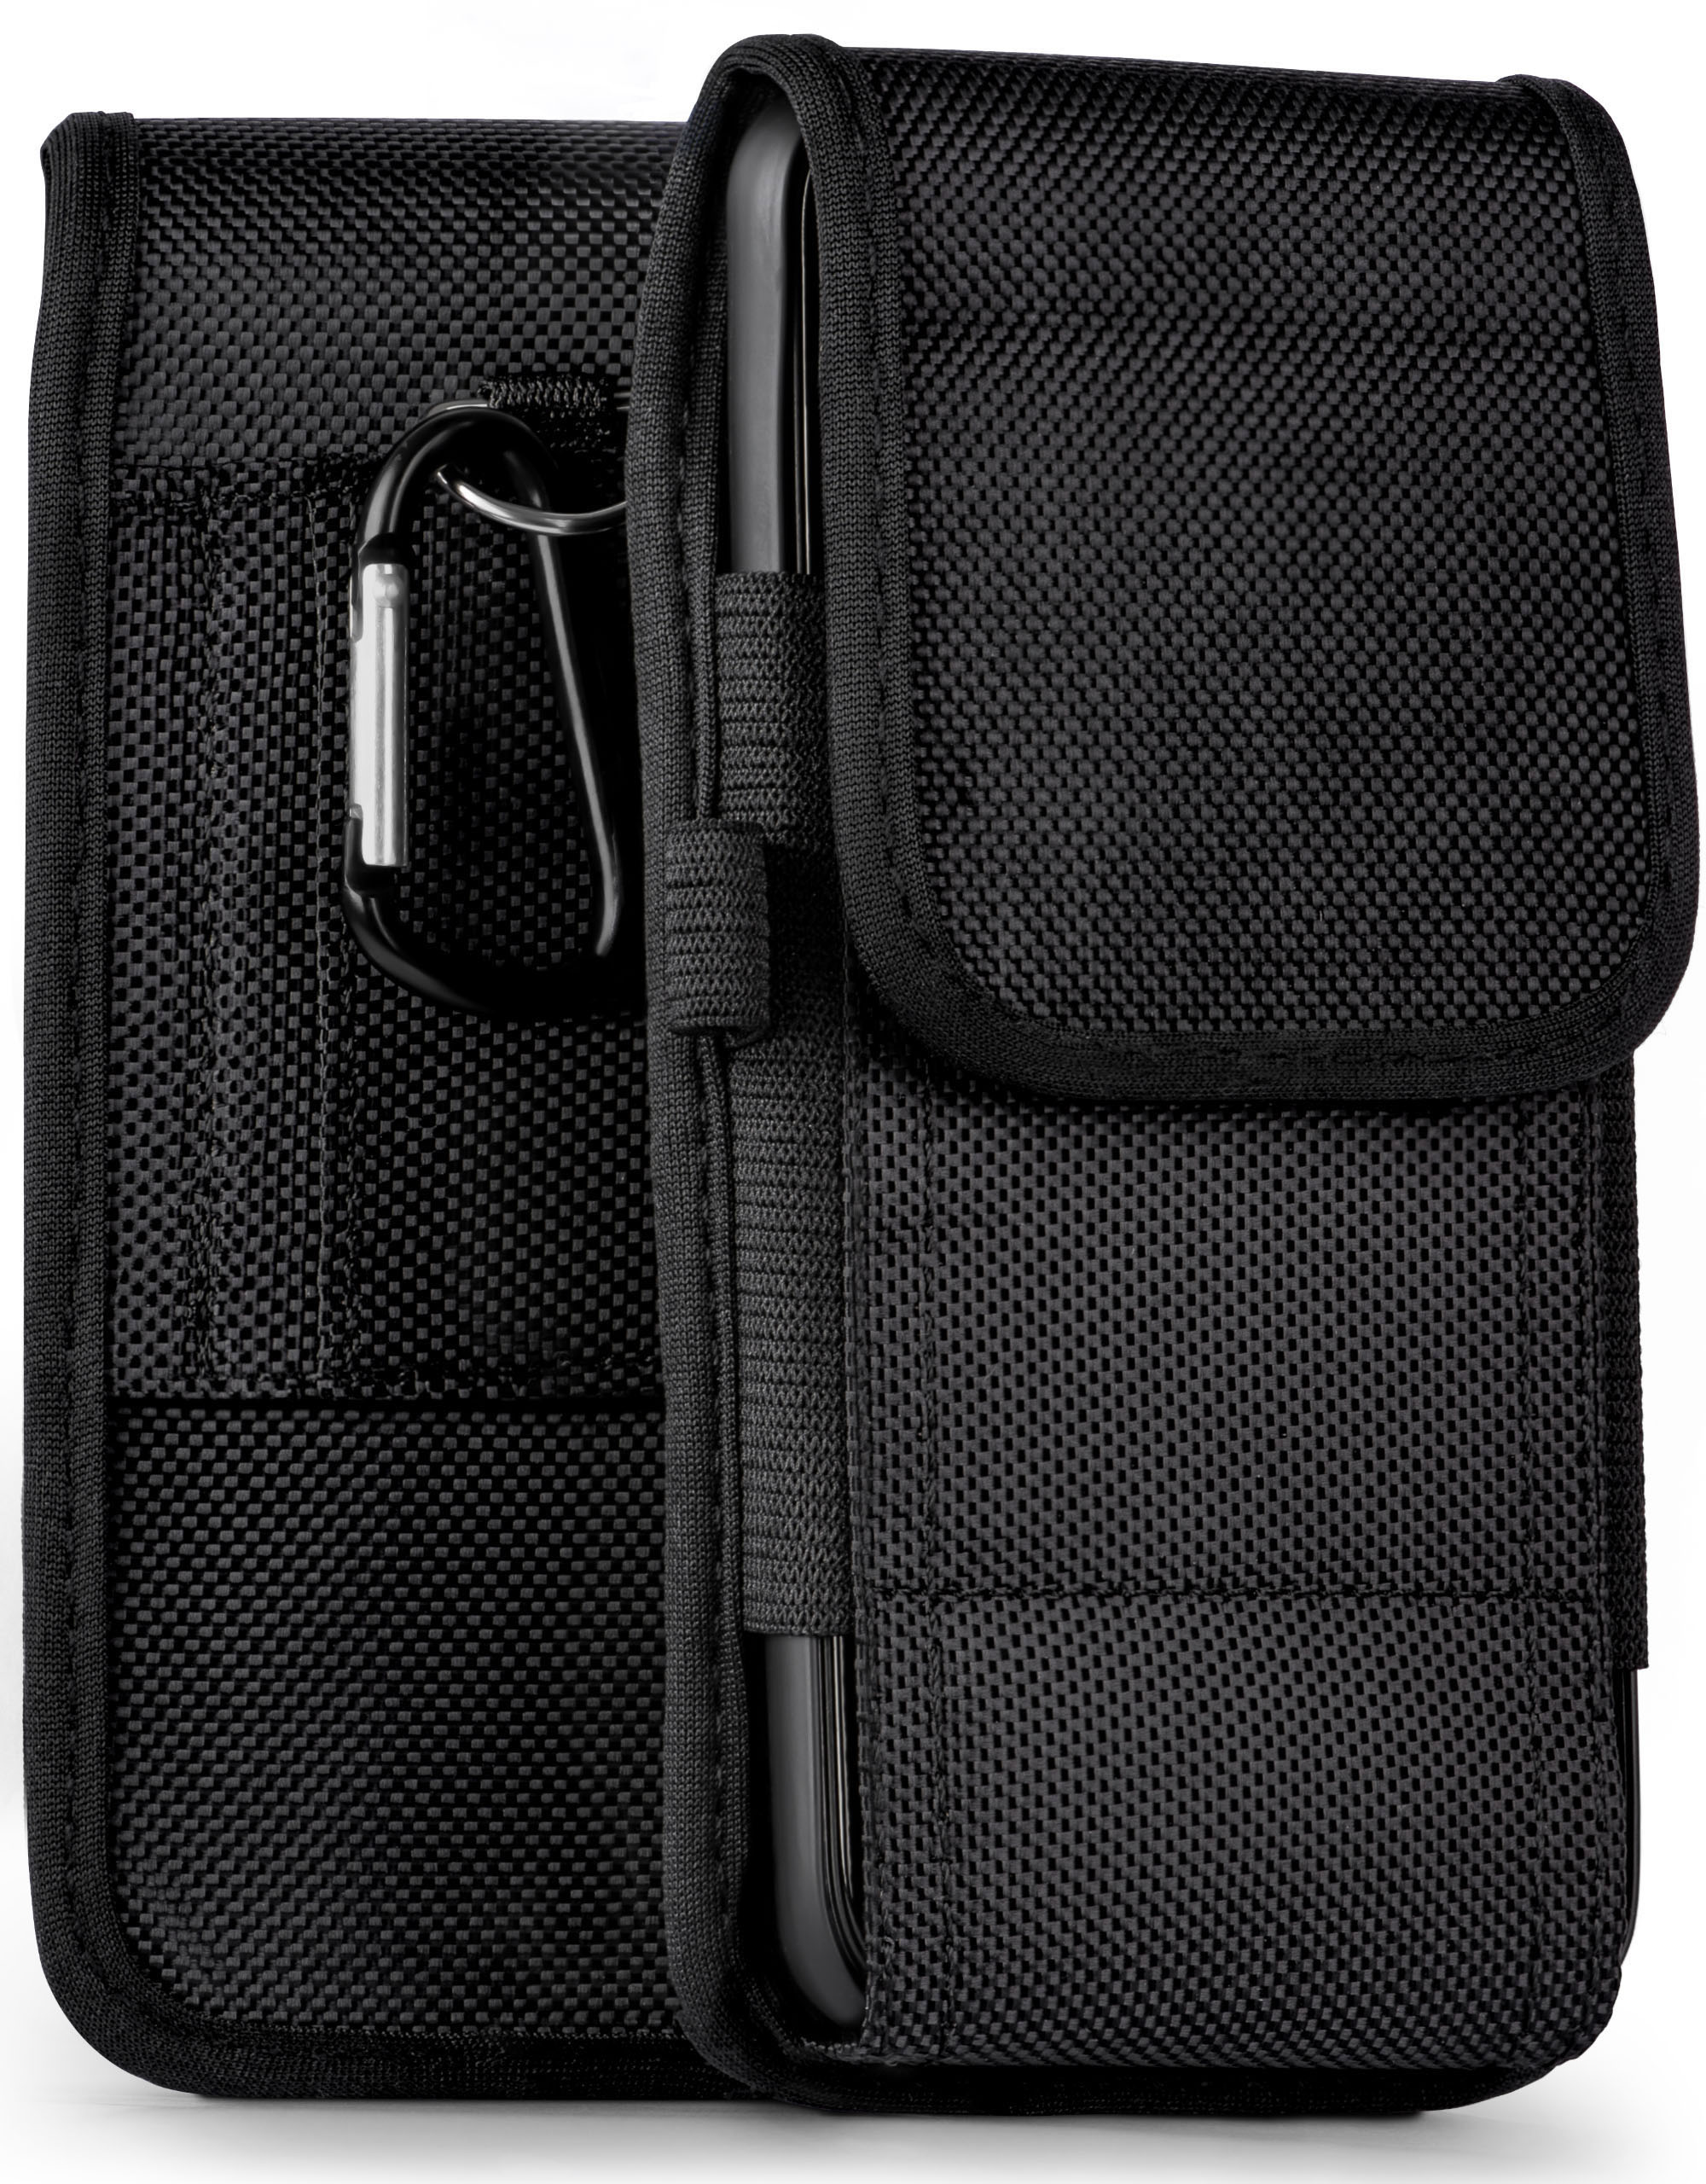 Sharp, Aquos Holster, Agility Case, Trail D10, MOEX